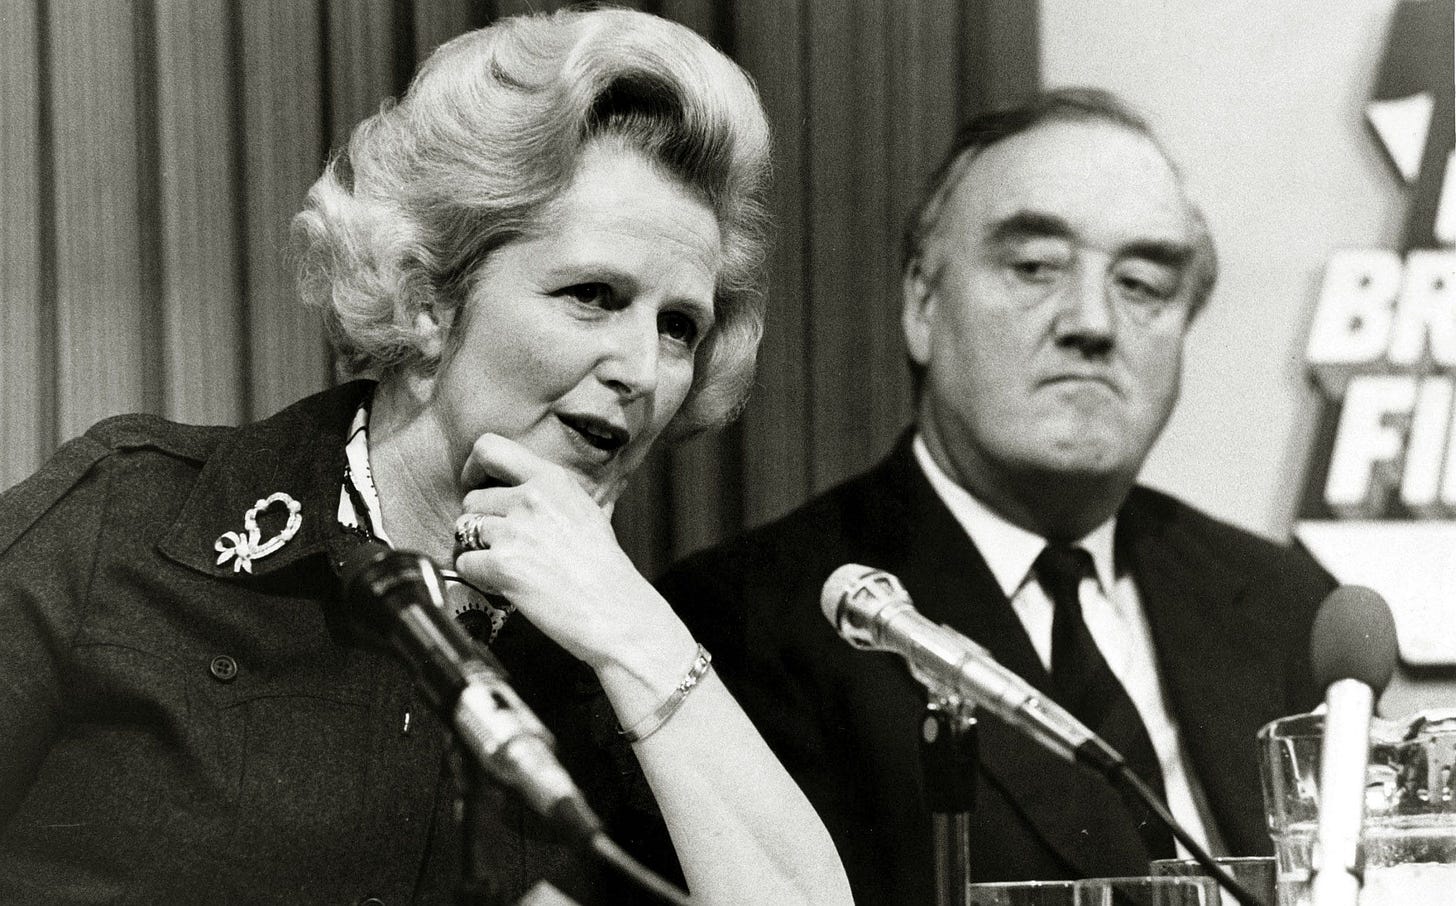 Without Willie Whitelaw, Thatcher would not have achieved as much. Liz  Truss needs a similar figure